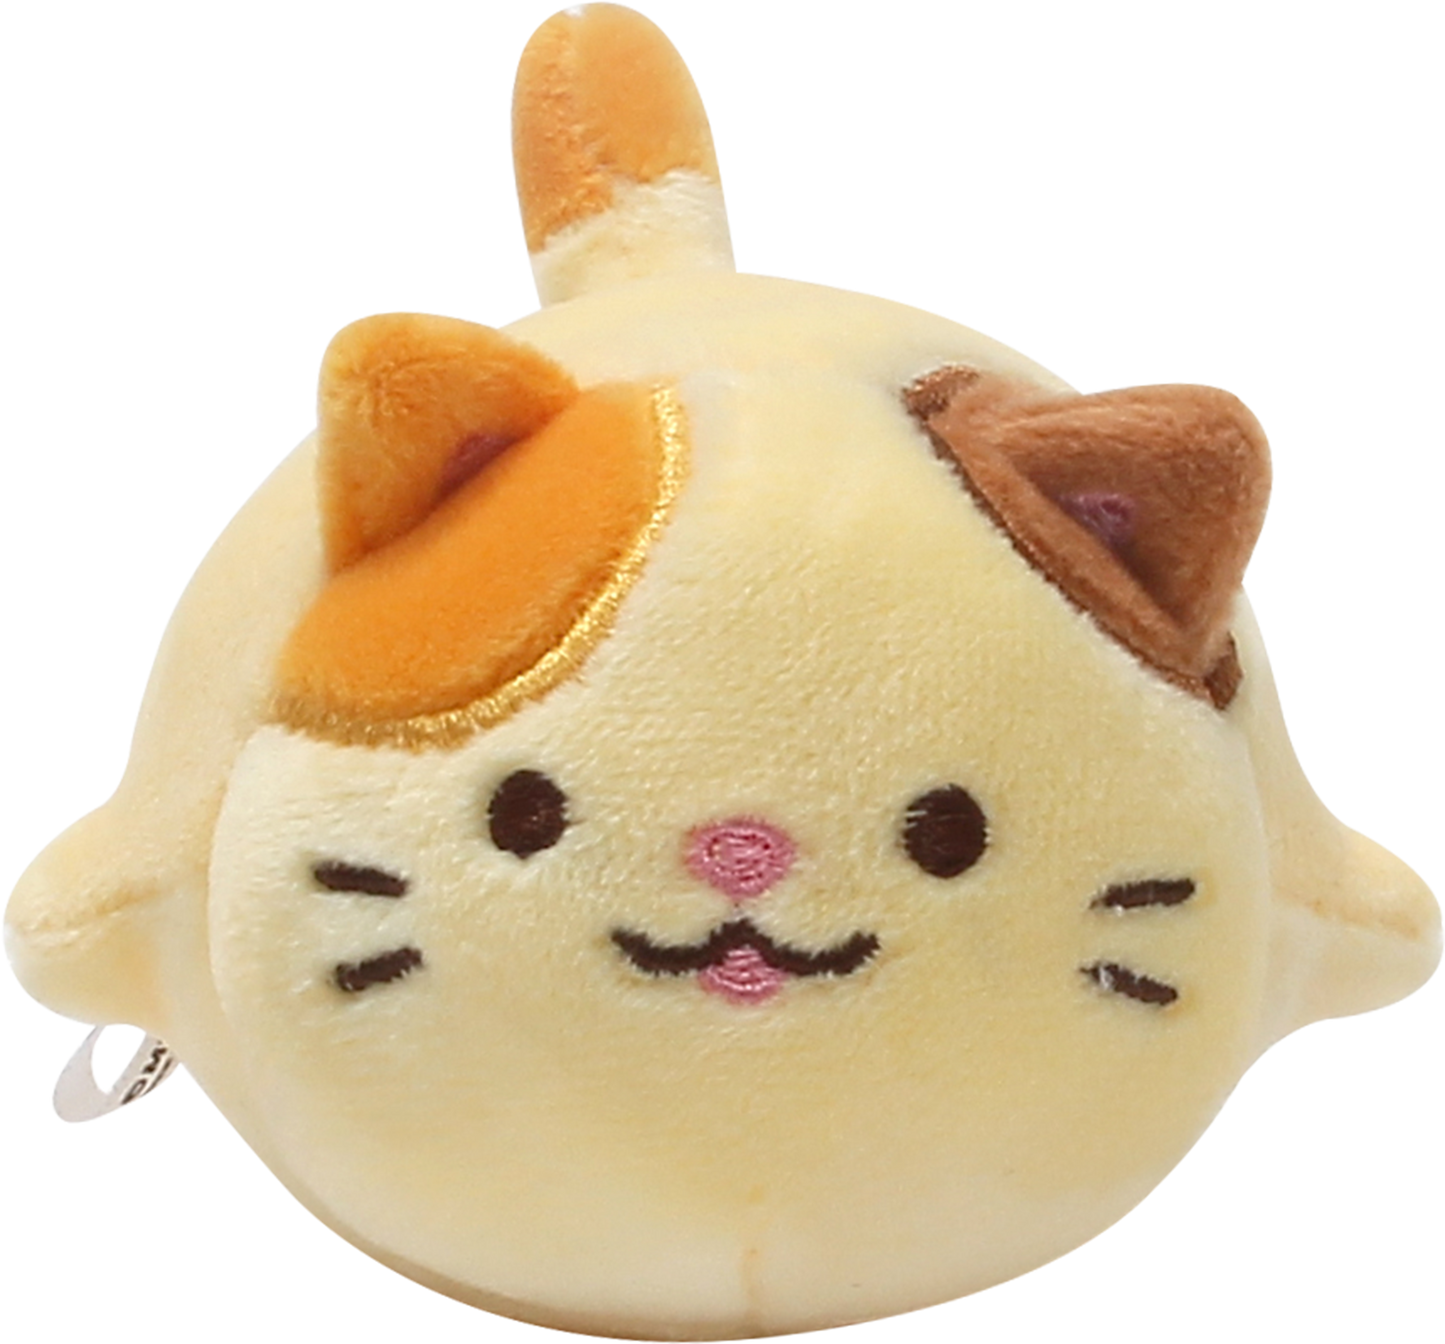 Front view of Cheese, a calico cat plush.